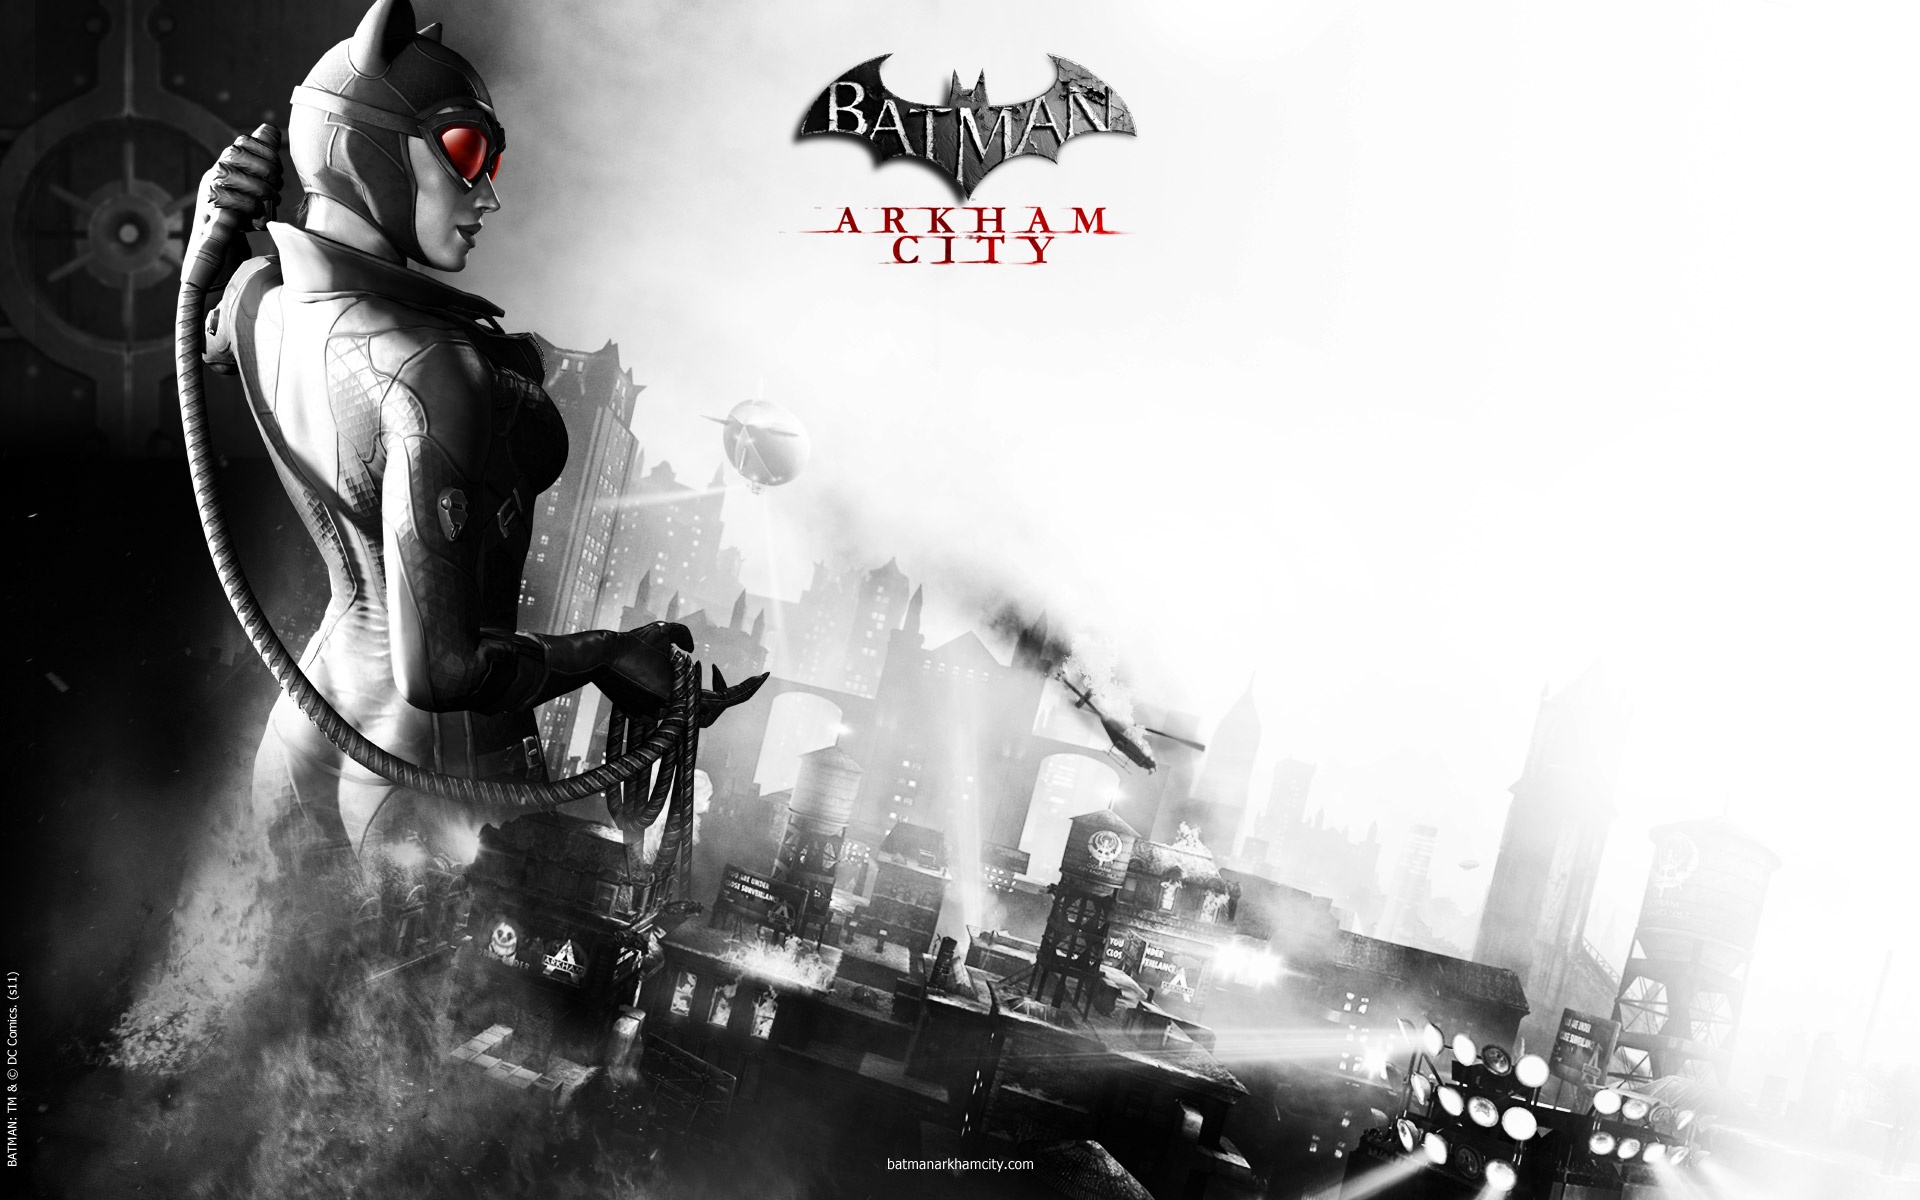 Batman: Arkham City - Game of the Year Edition official